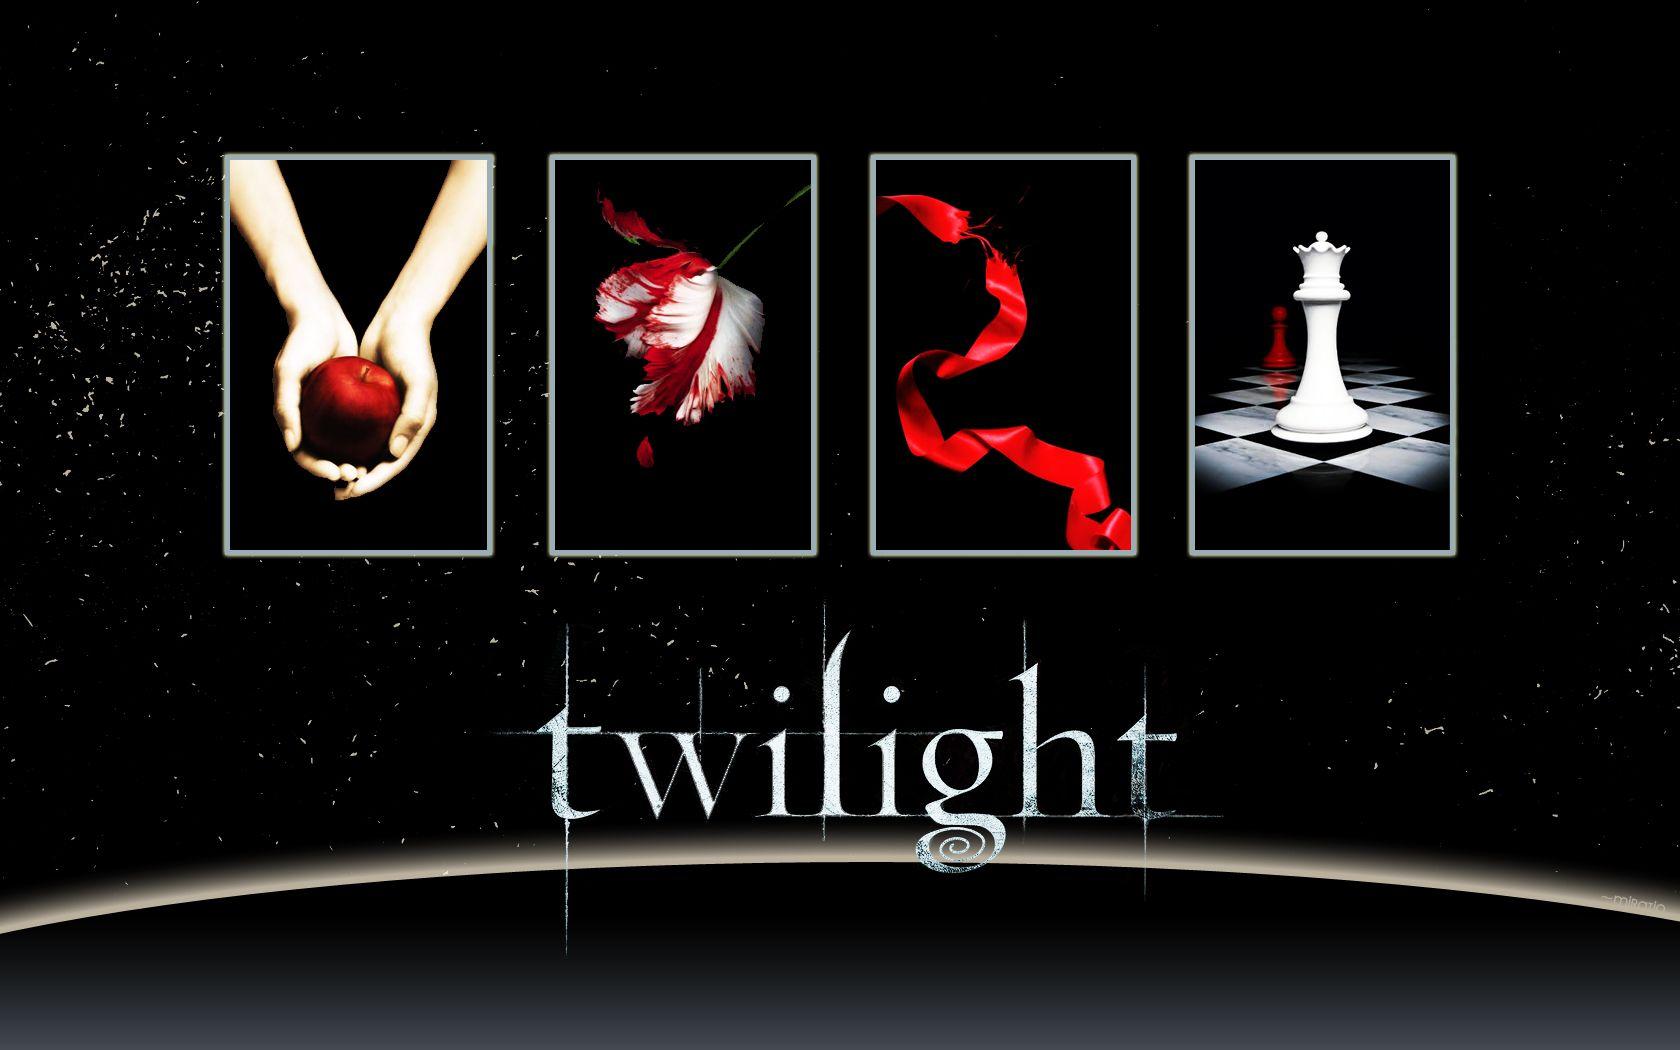 Twilight-Saga Logo - Lesser Known Facts About The Twilight Books